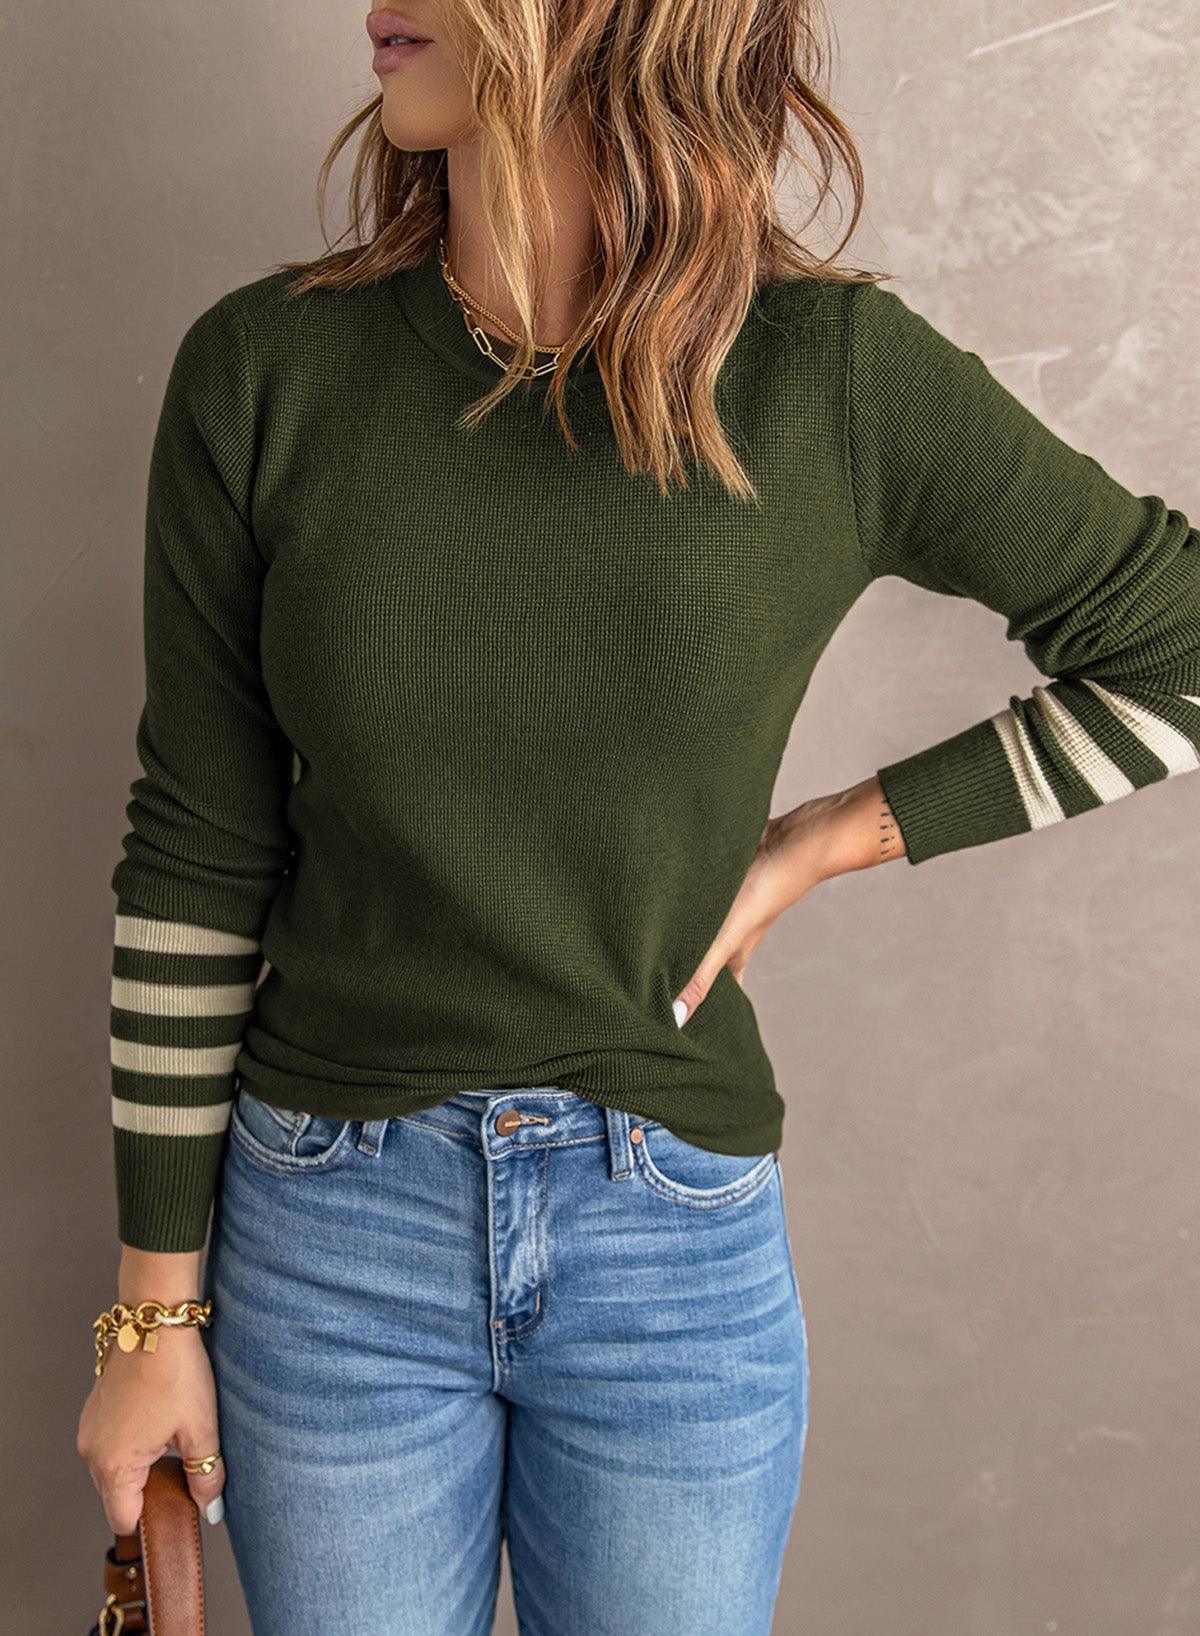 Stripe Accent Long Sleeve Olive Green Knit Sweater - MXSTUDIO.COM